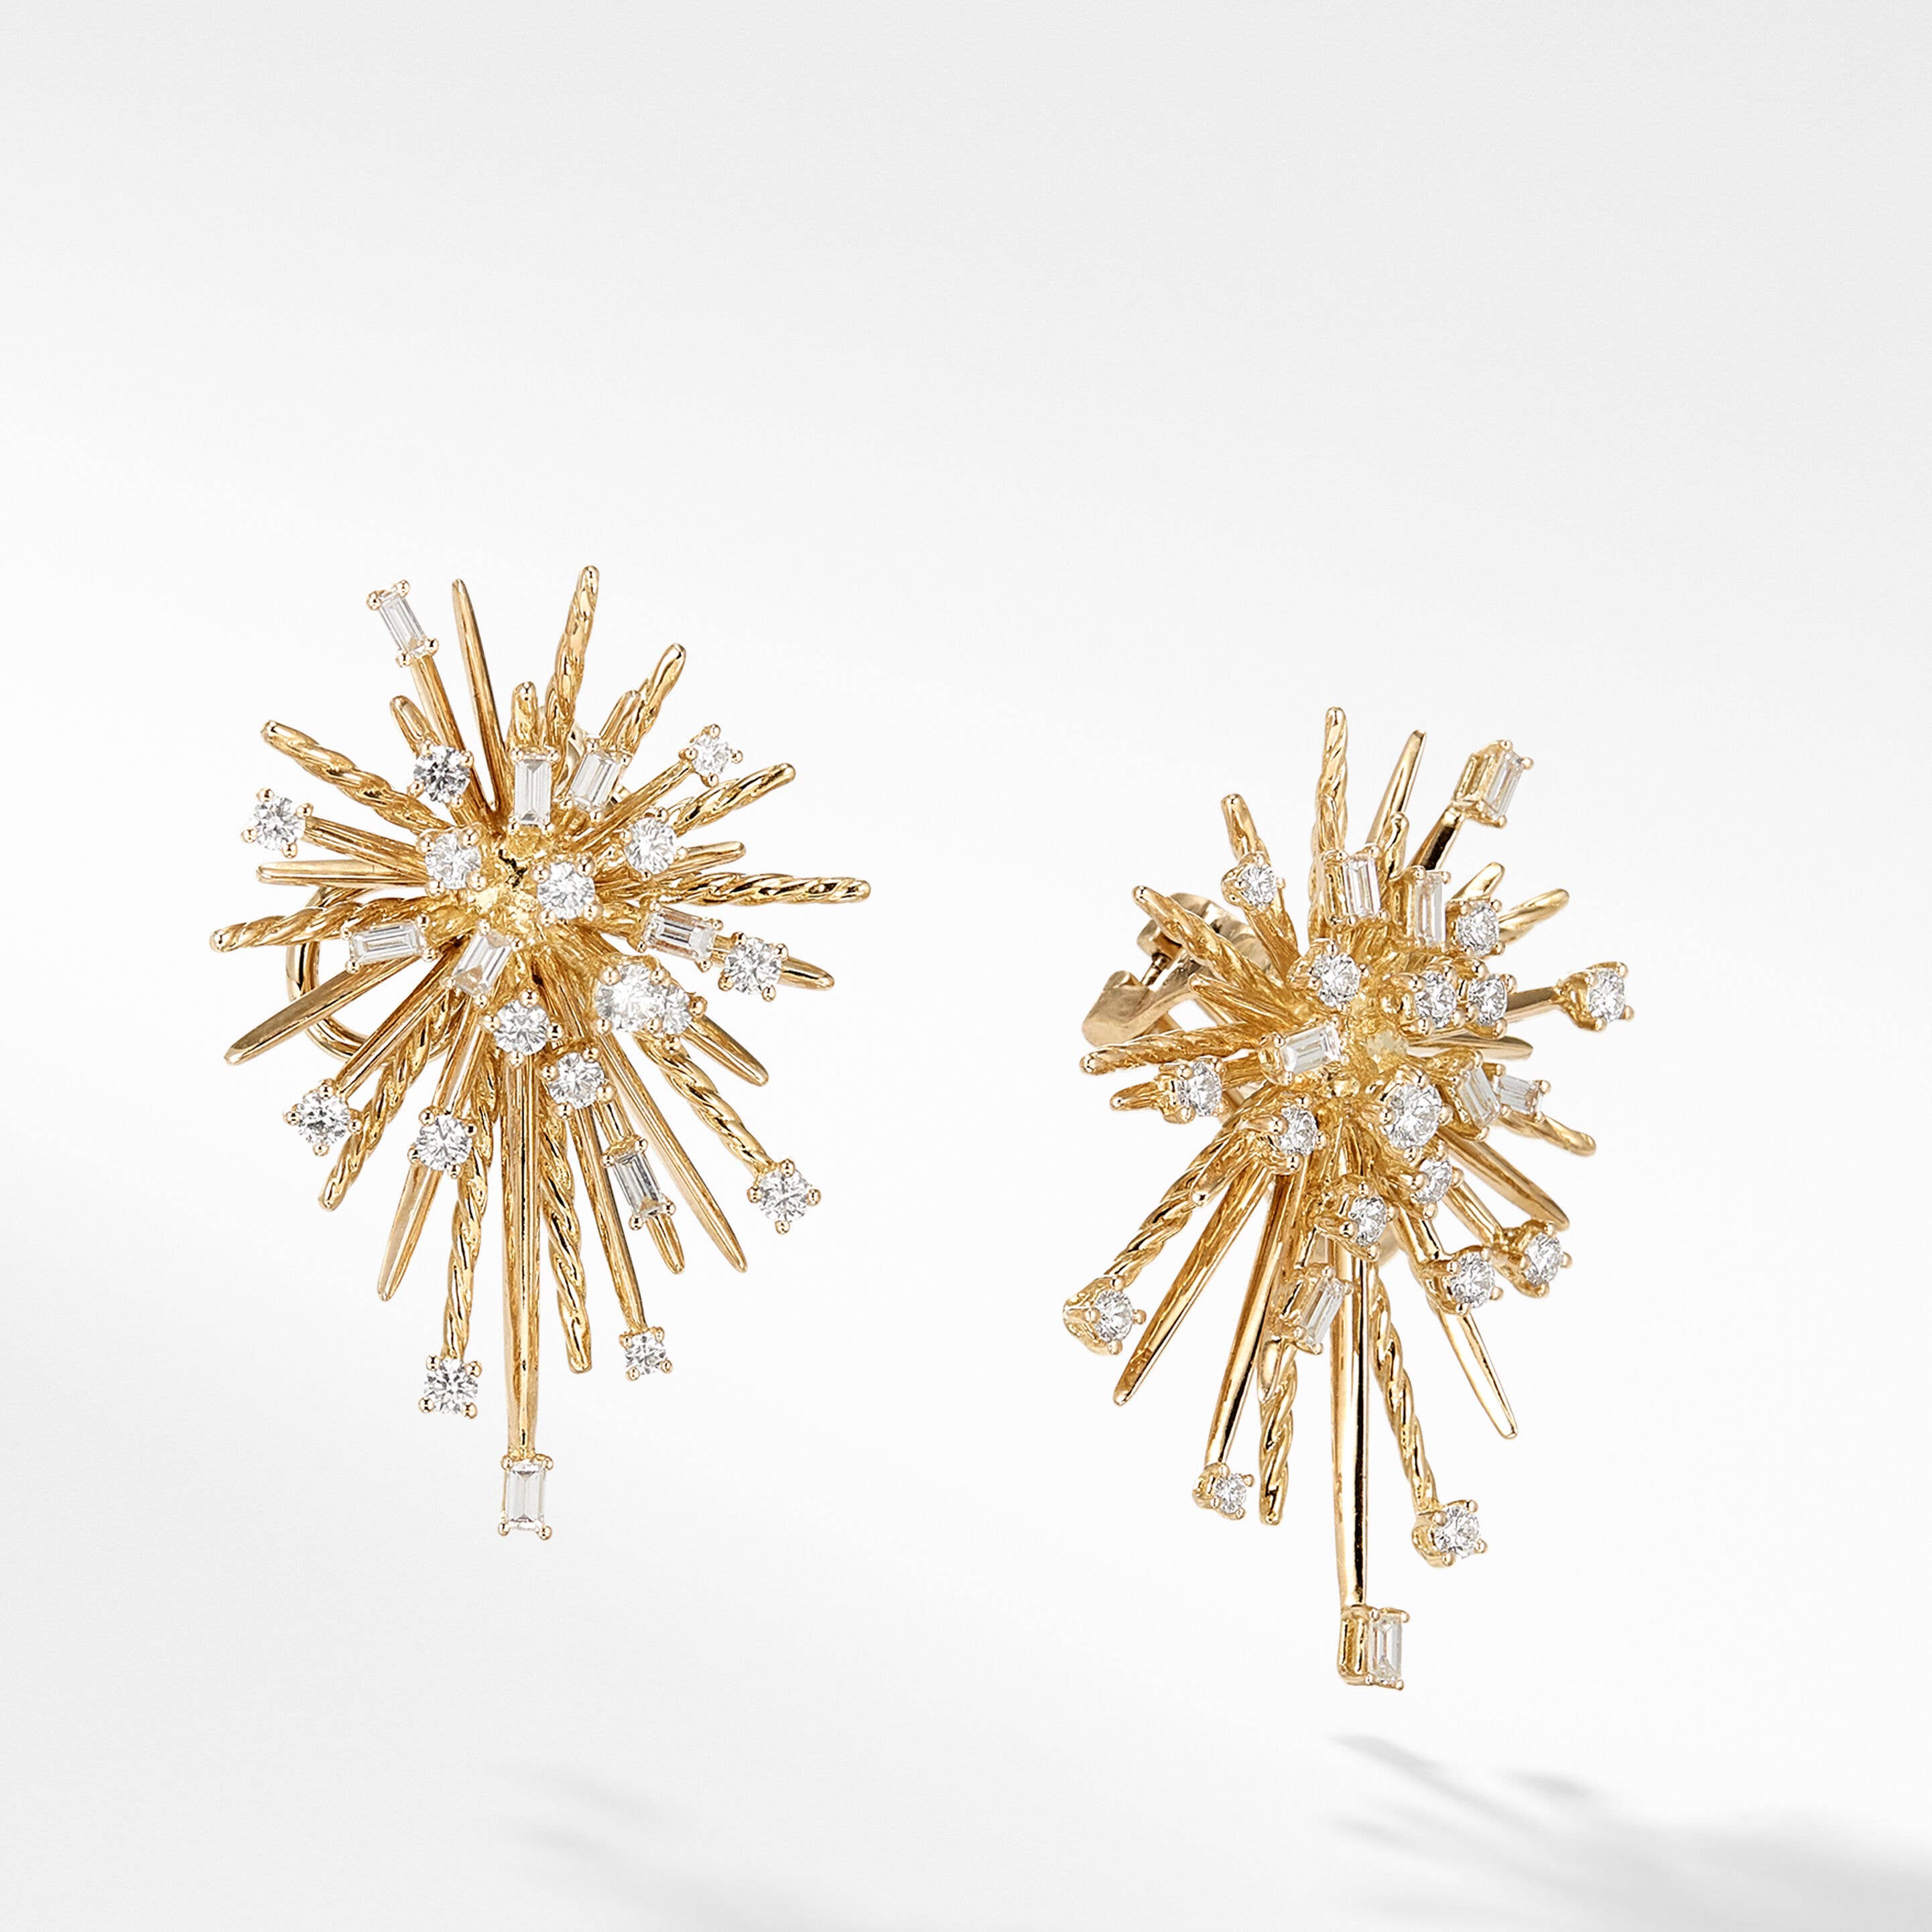 Supernova Climber Earrings in 18K Yellow Gold with Diamonds, 33.7mm